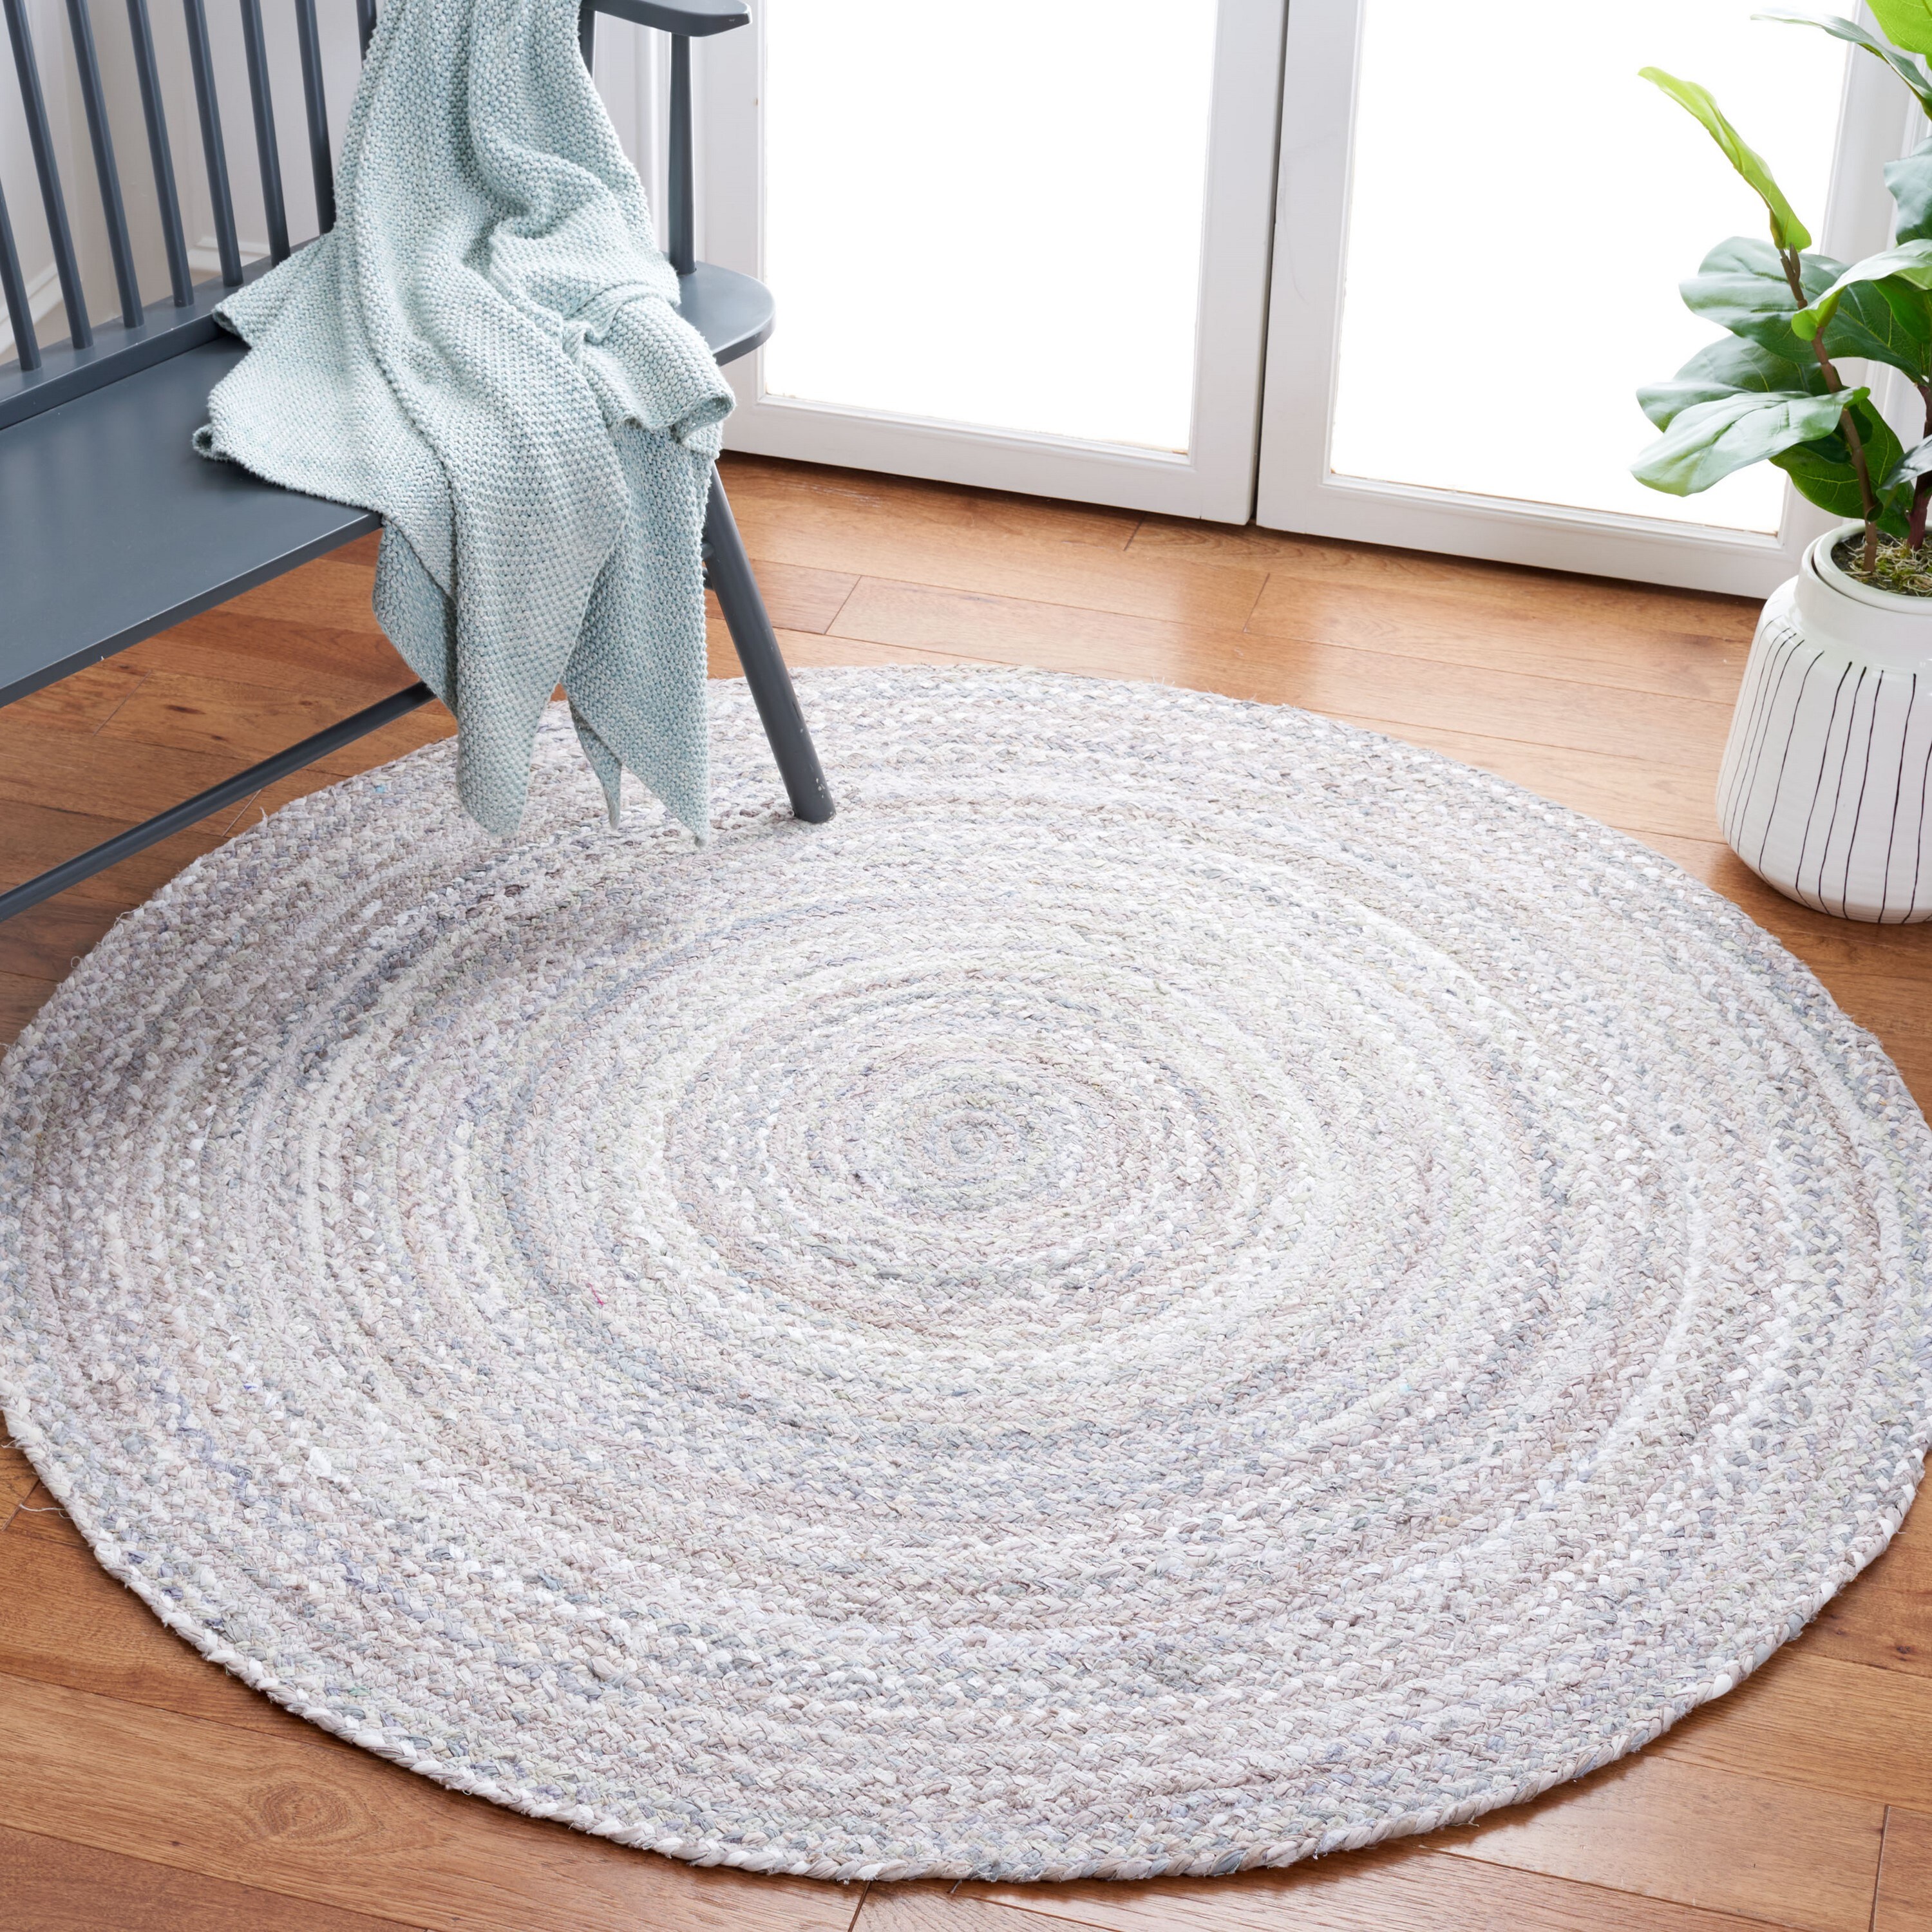 Safavieh Braided Lilie 5 x 5 Light Gray Round Indoor Stripe  Bohemian/Eclectic Area Rug in the Rugs department at